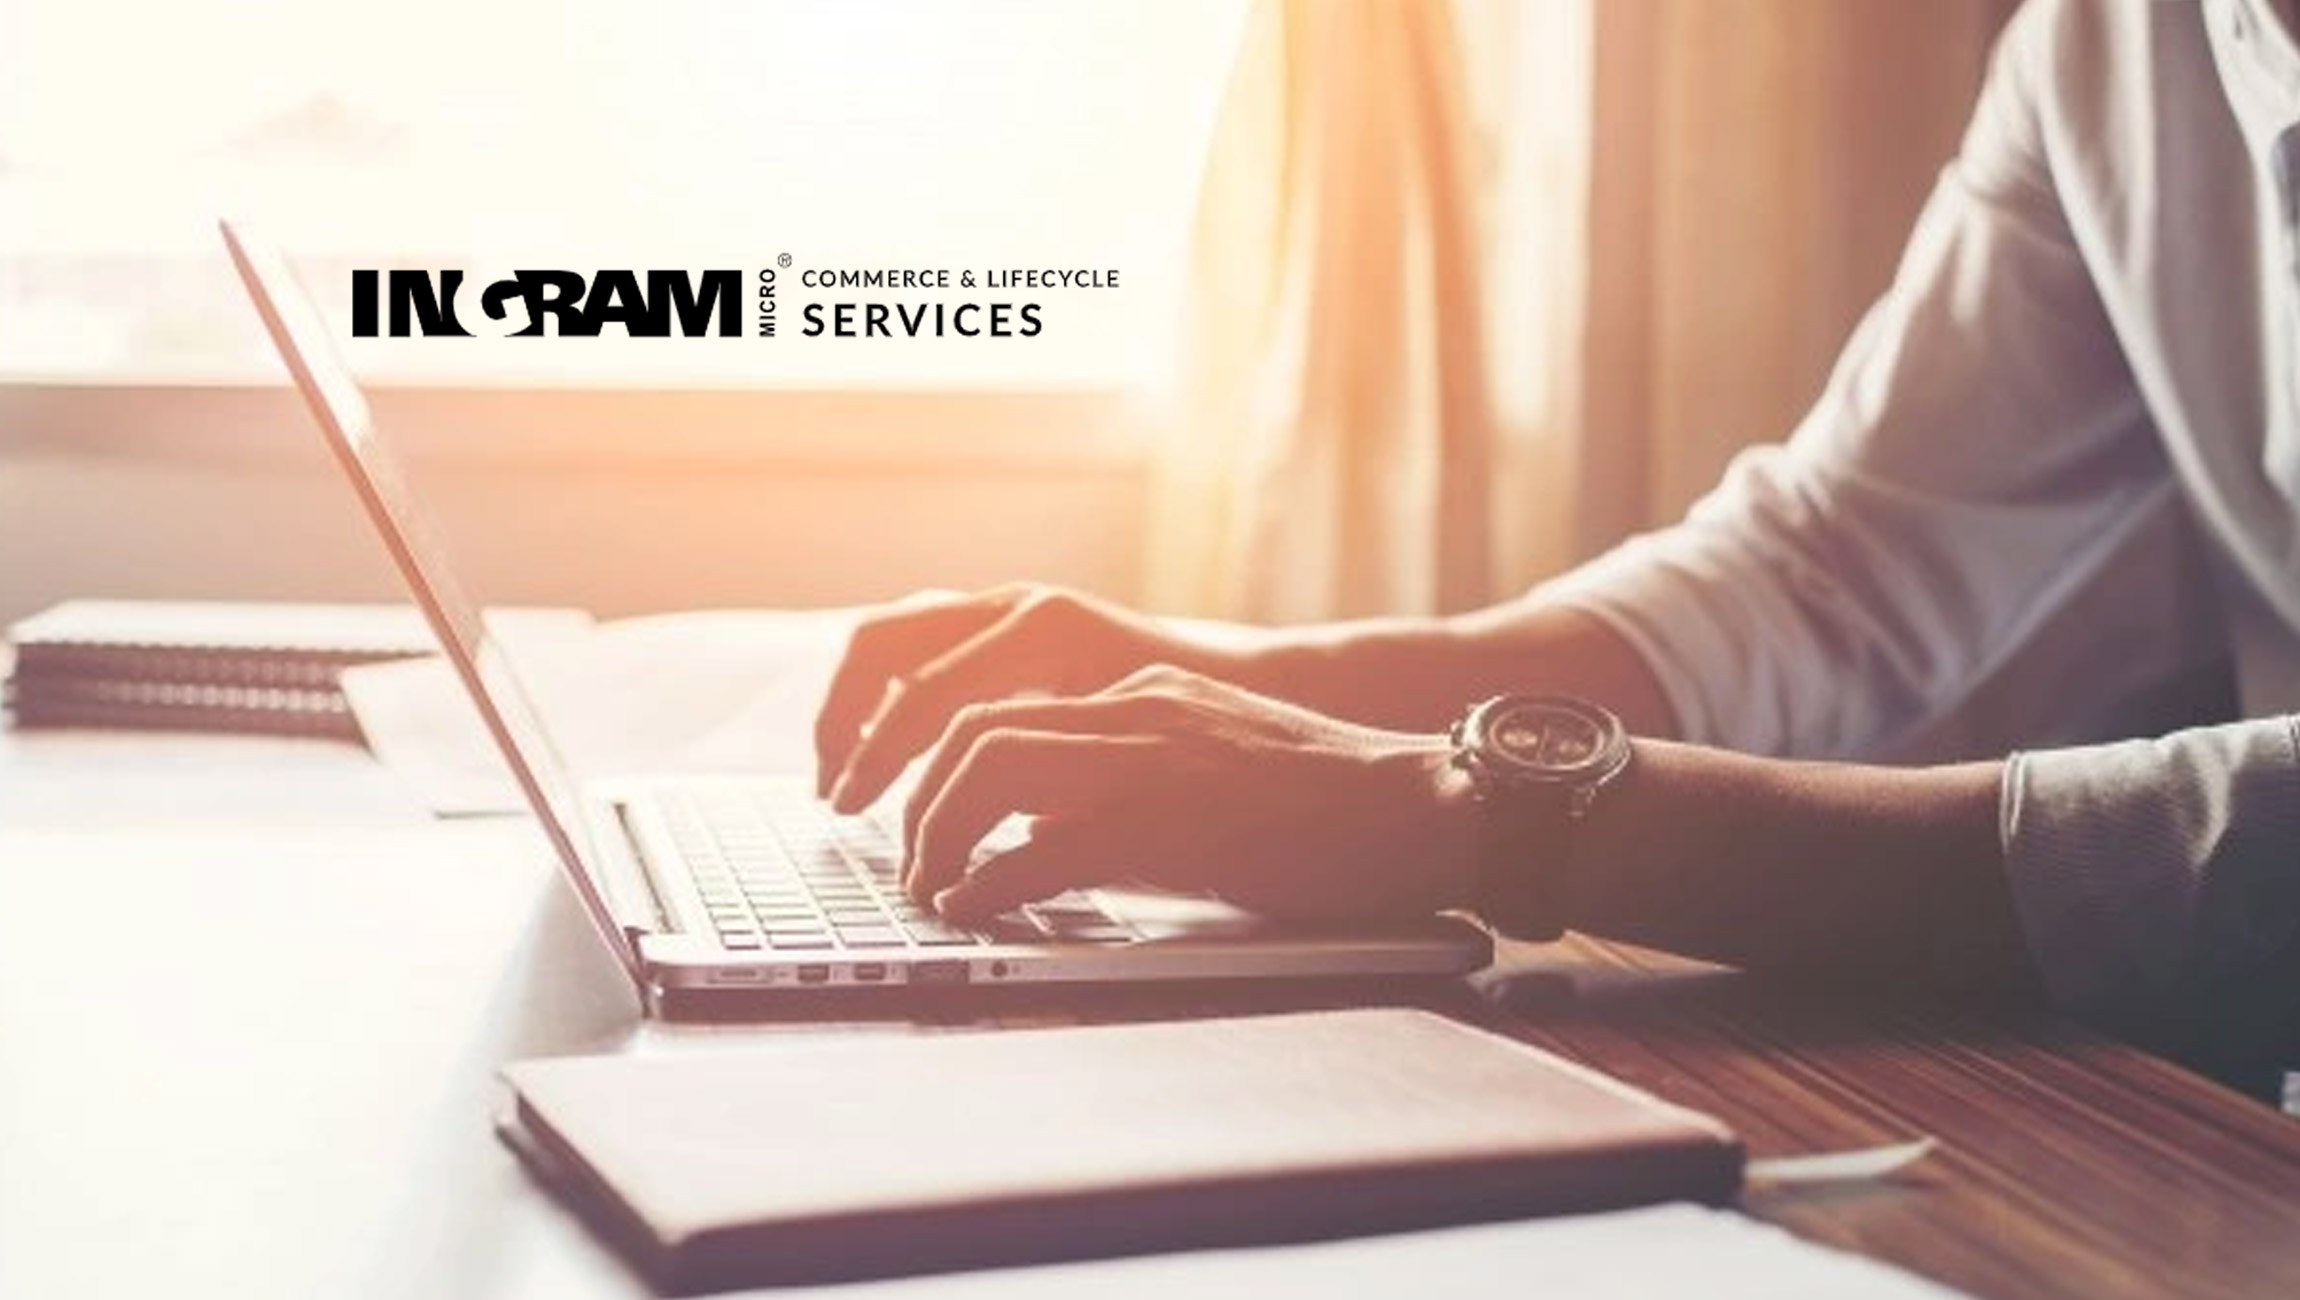 Ingram Micro Commerce & Lifecycle Services Enters New Market in Slovakia